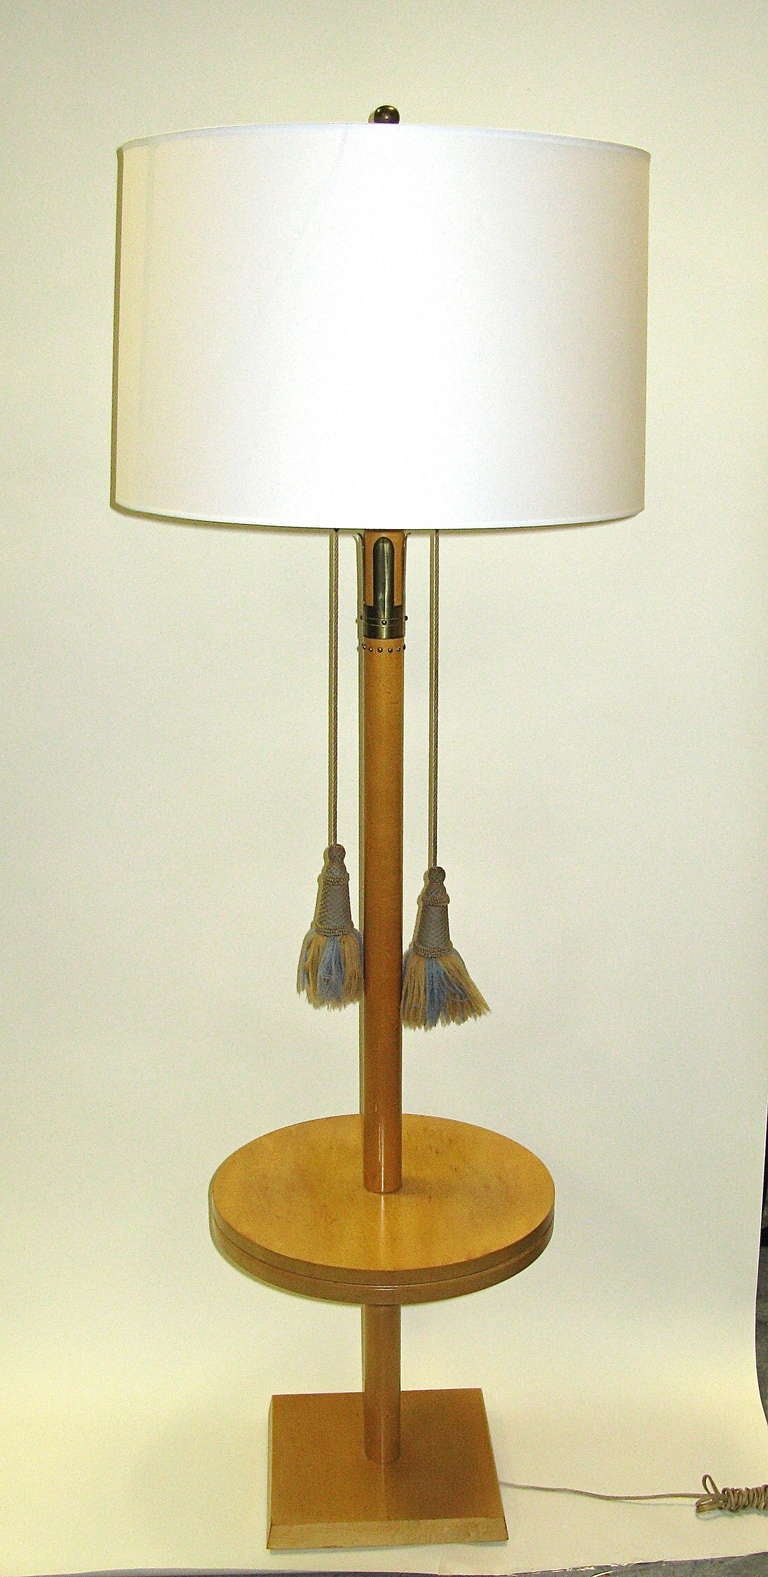 Light colored maple wood. Uses 2 standard socket light bulbs.Each can be individually controlled with the rope pulls. Rope pulls are removable if preferred. Needs appropriate lampshade.Base measures 11 inches x 11 inches. Stamped.